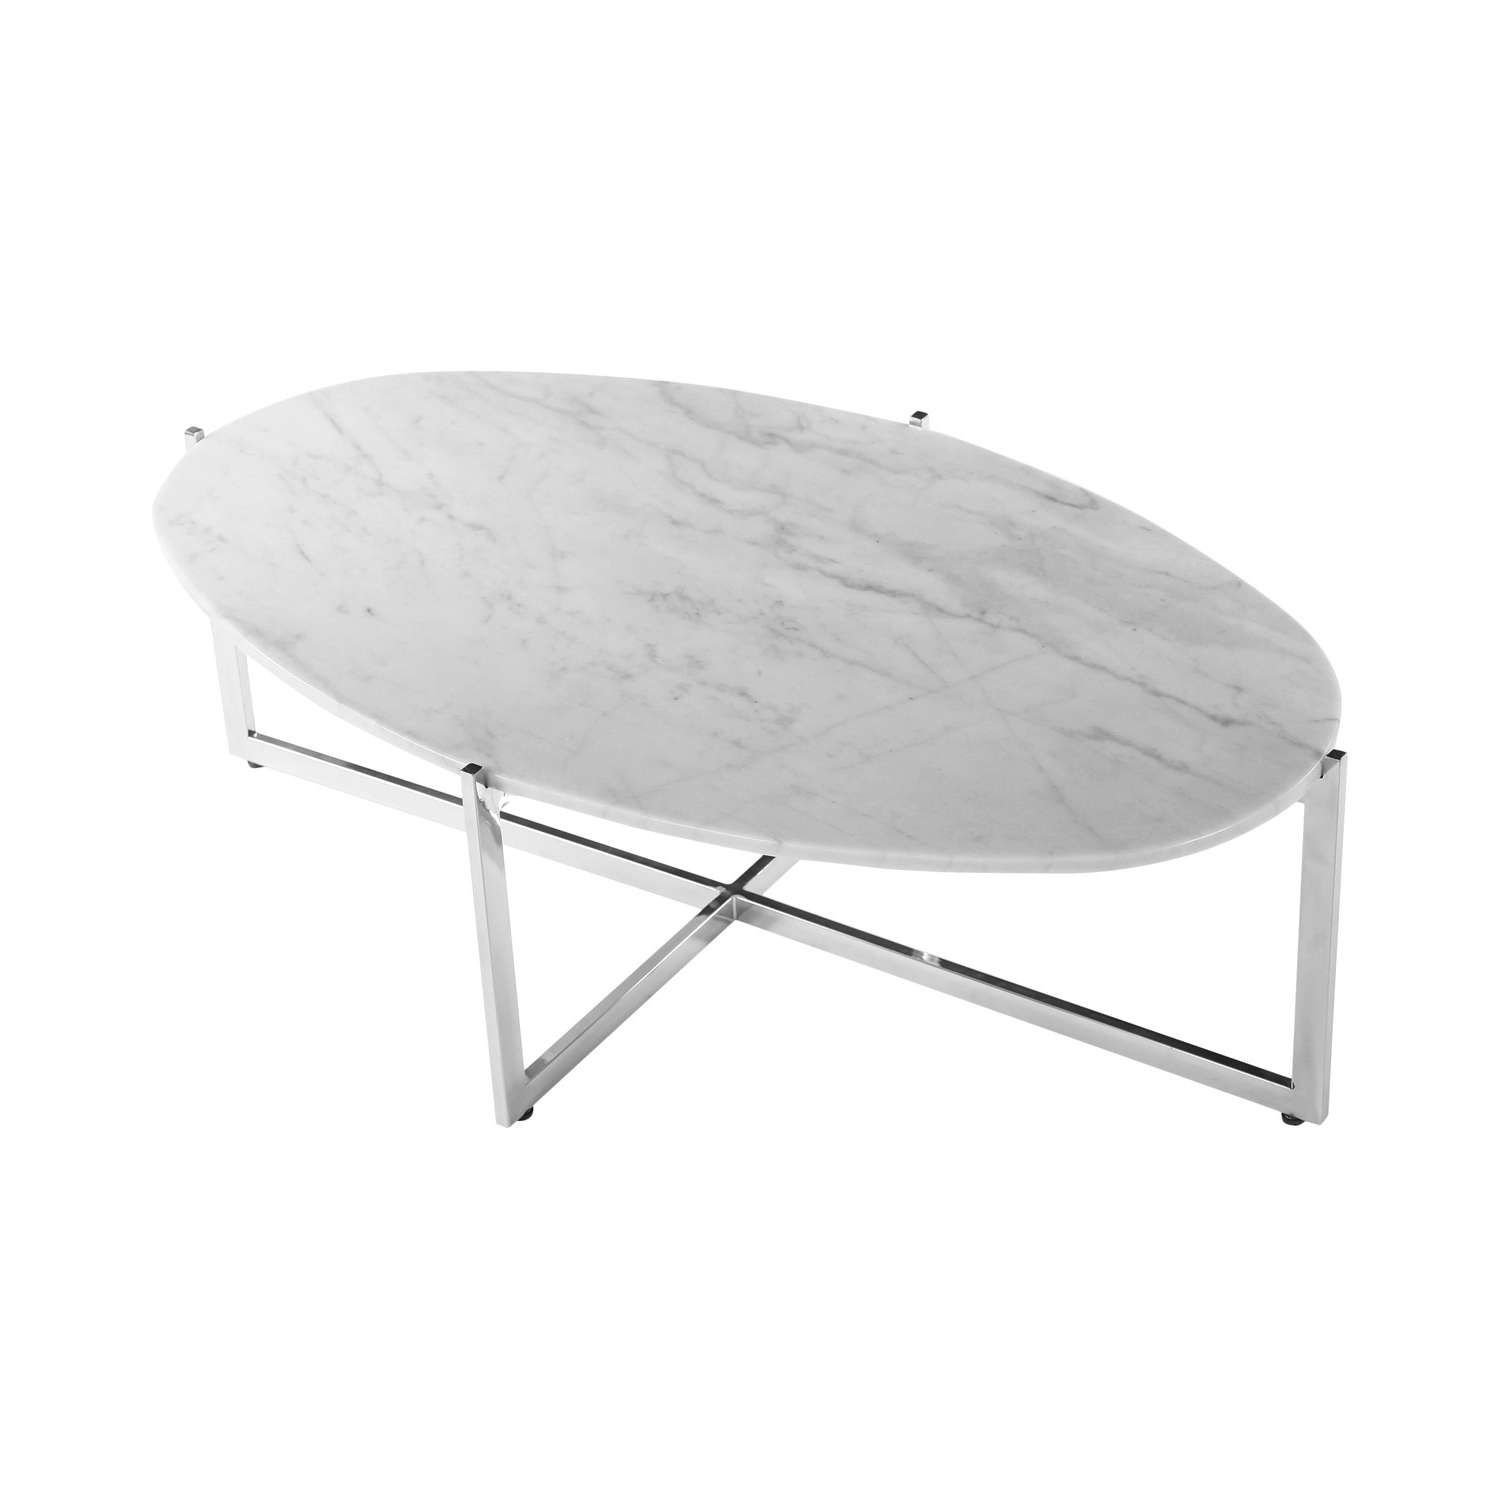 Coffee Tables : Selina Oa Selinamarble Grey Marble Oval Coffee For Recent White Oval Coffee Tables (View 10 of 20)